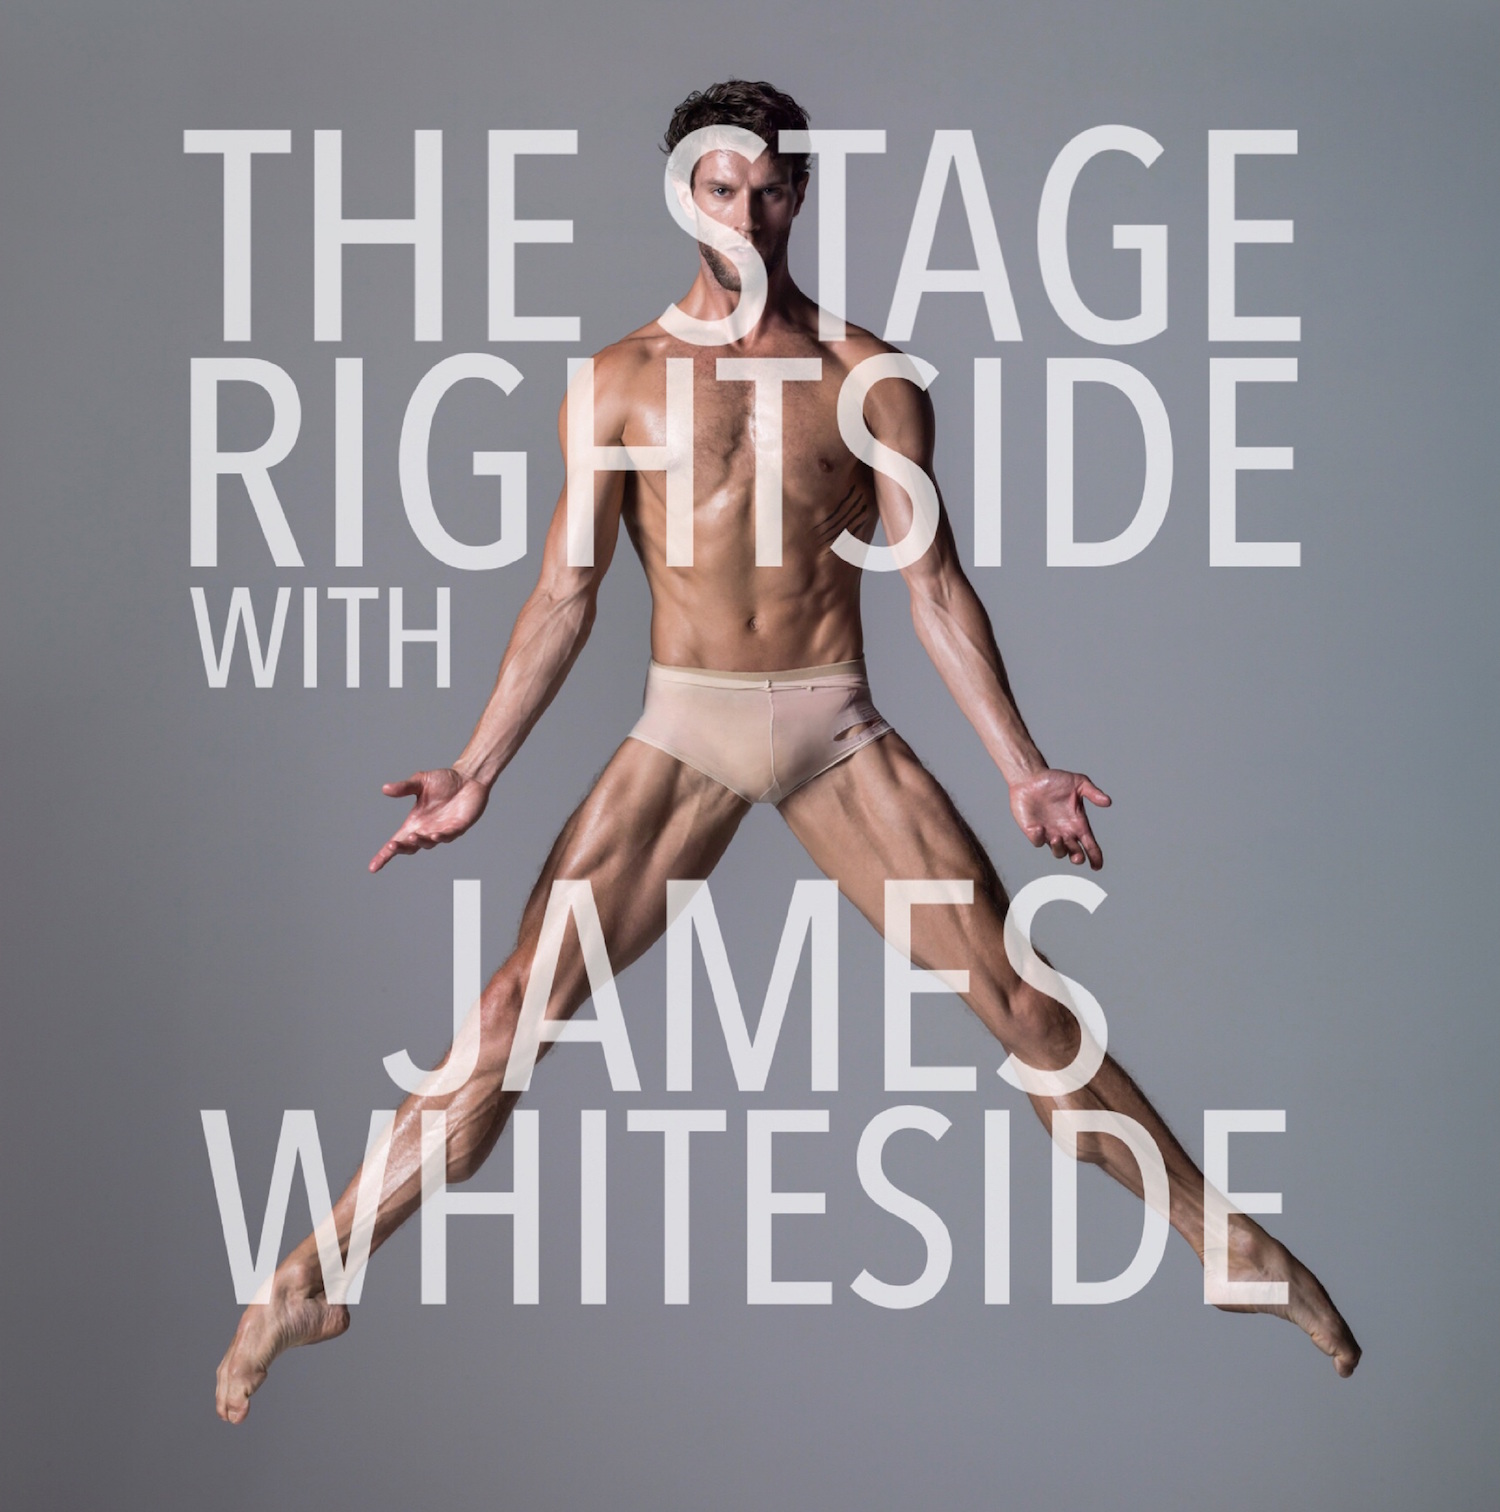 The Stage Rightside with James Whiteside